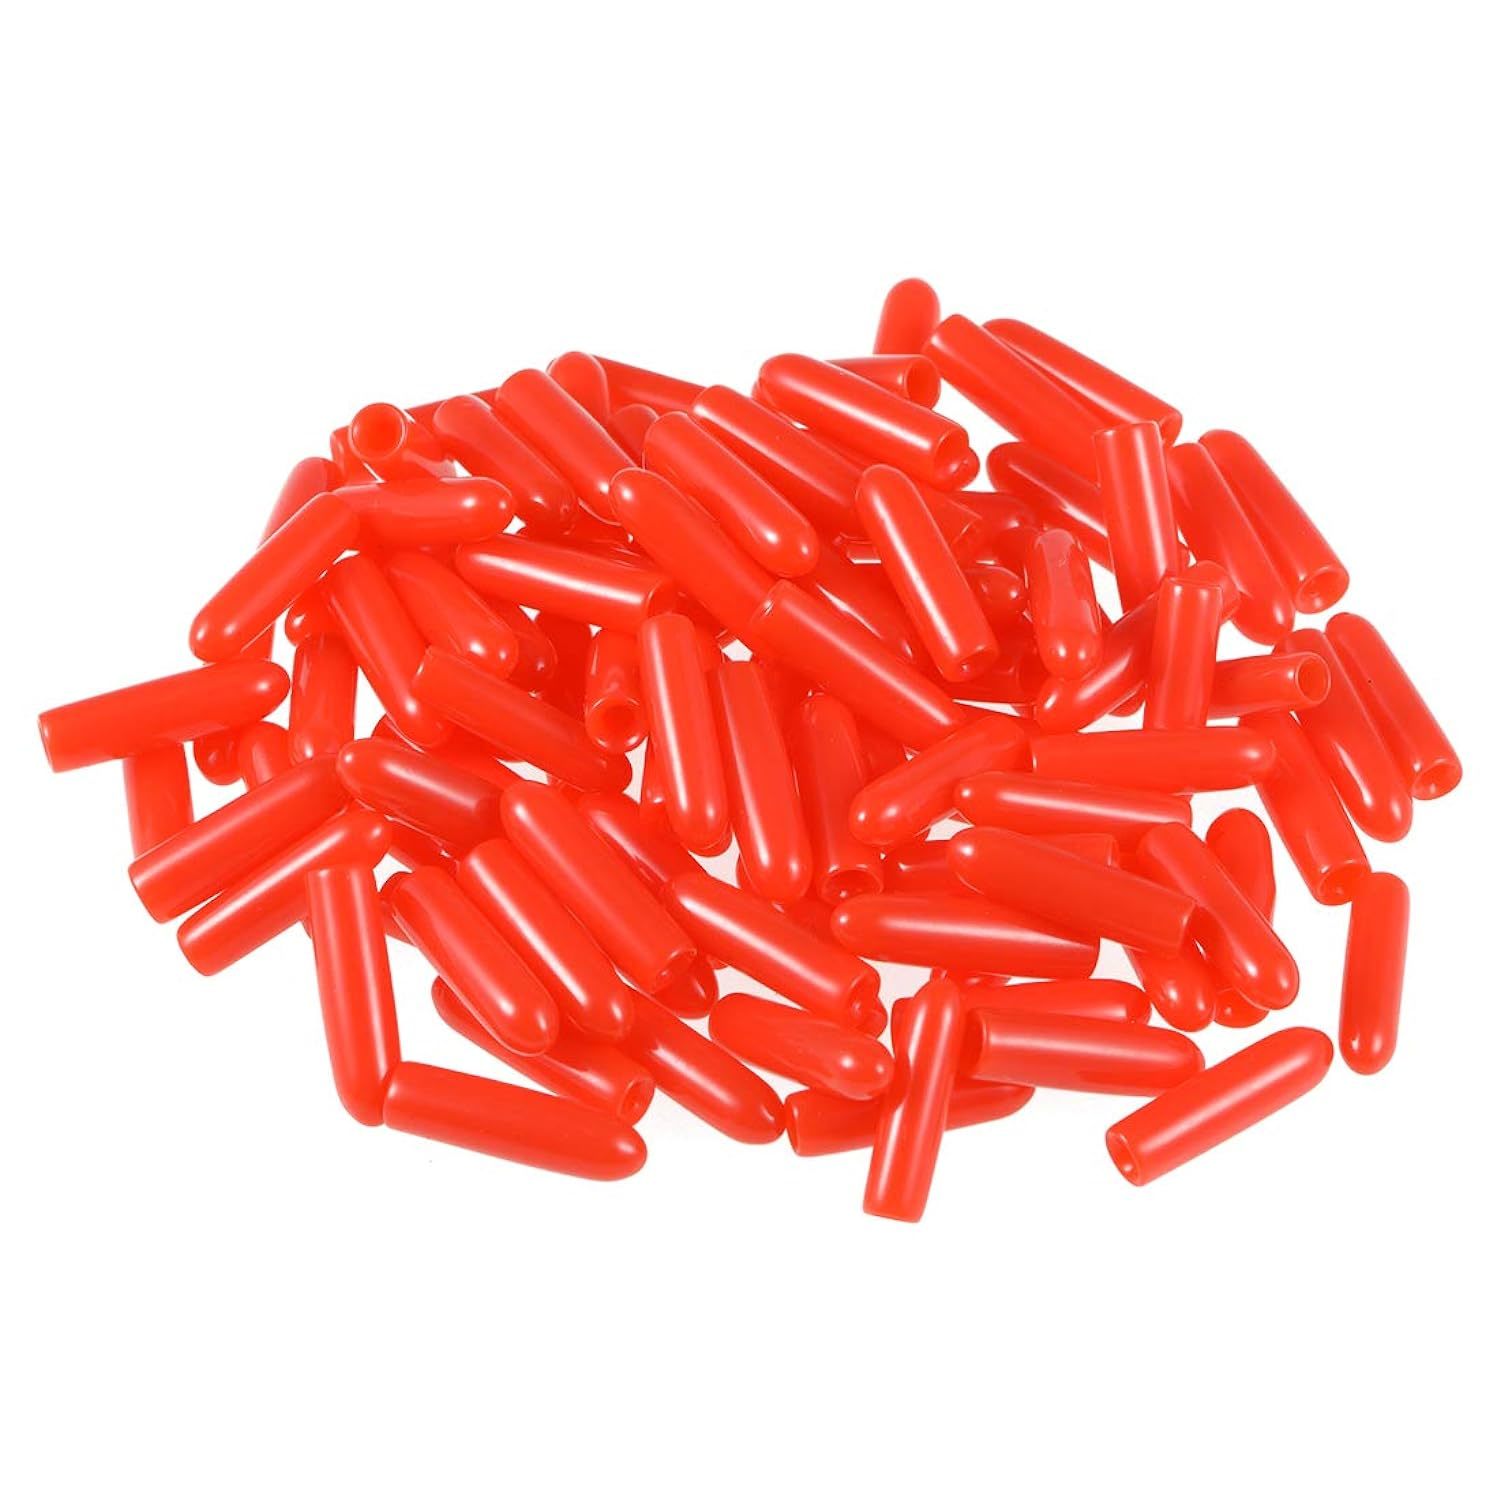 Primary image for uxcell 100pcs Rubber End Caps 2mm ID Vinyl Round Tube Bolt Cap Cover Thread Prot